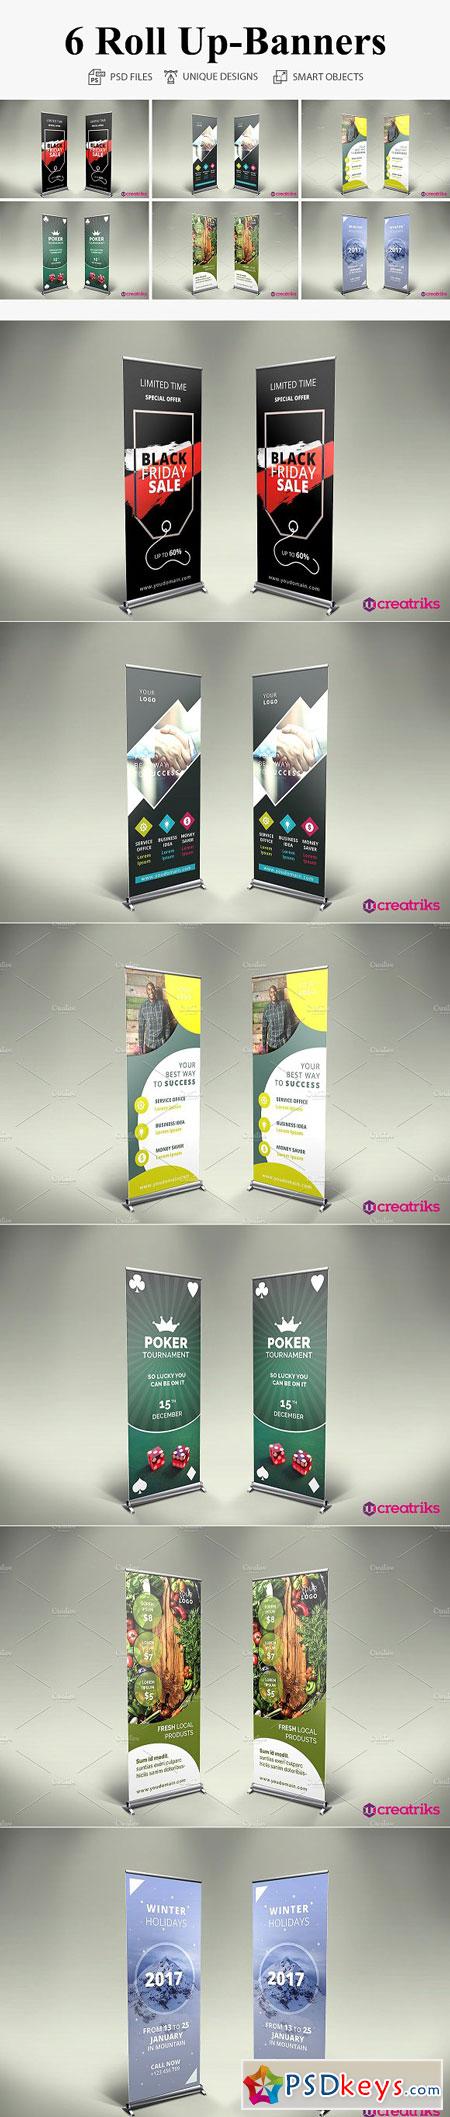 6 Roll Up Banners 2912752